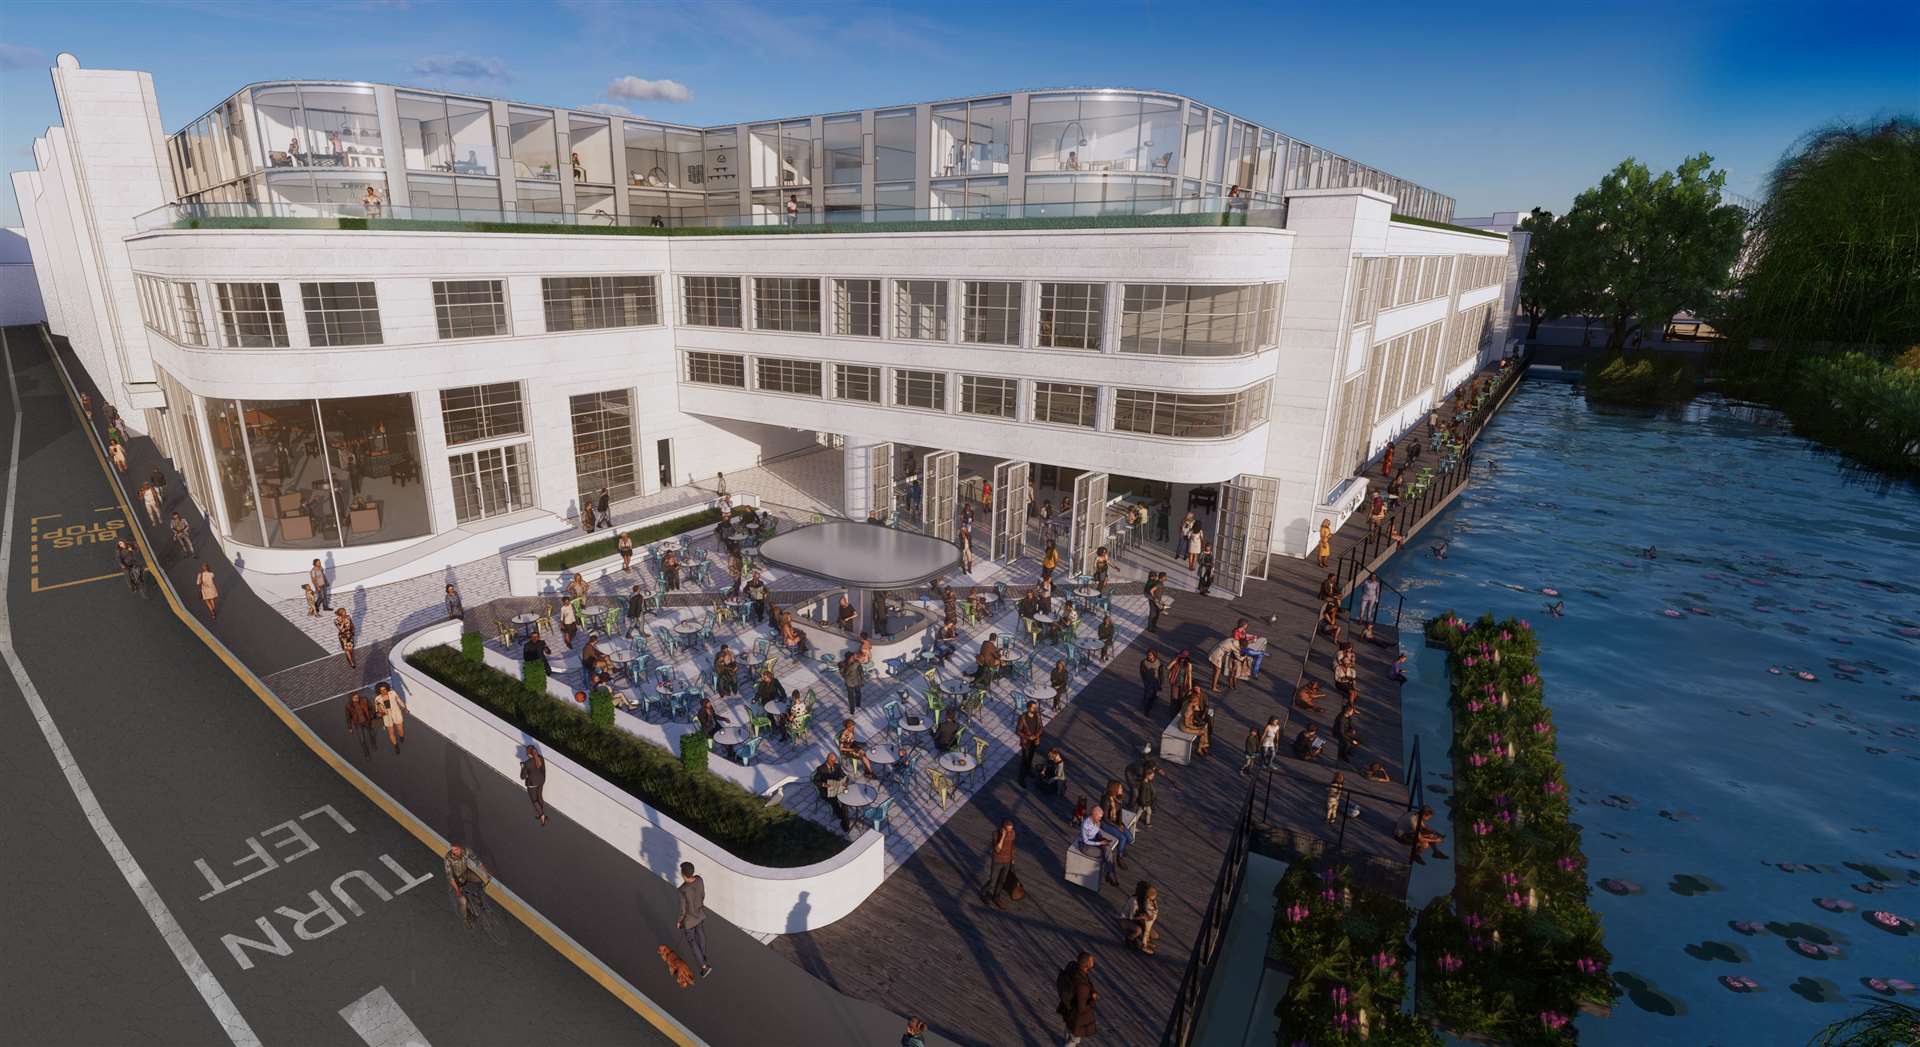 Artist impression of what Len House in Maidstone could look like after £30m renovations